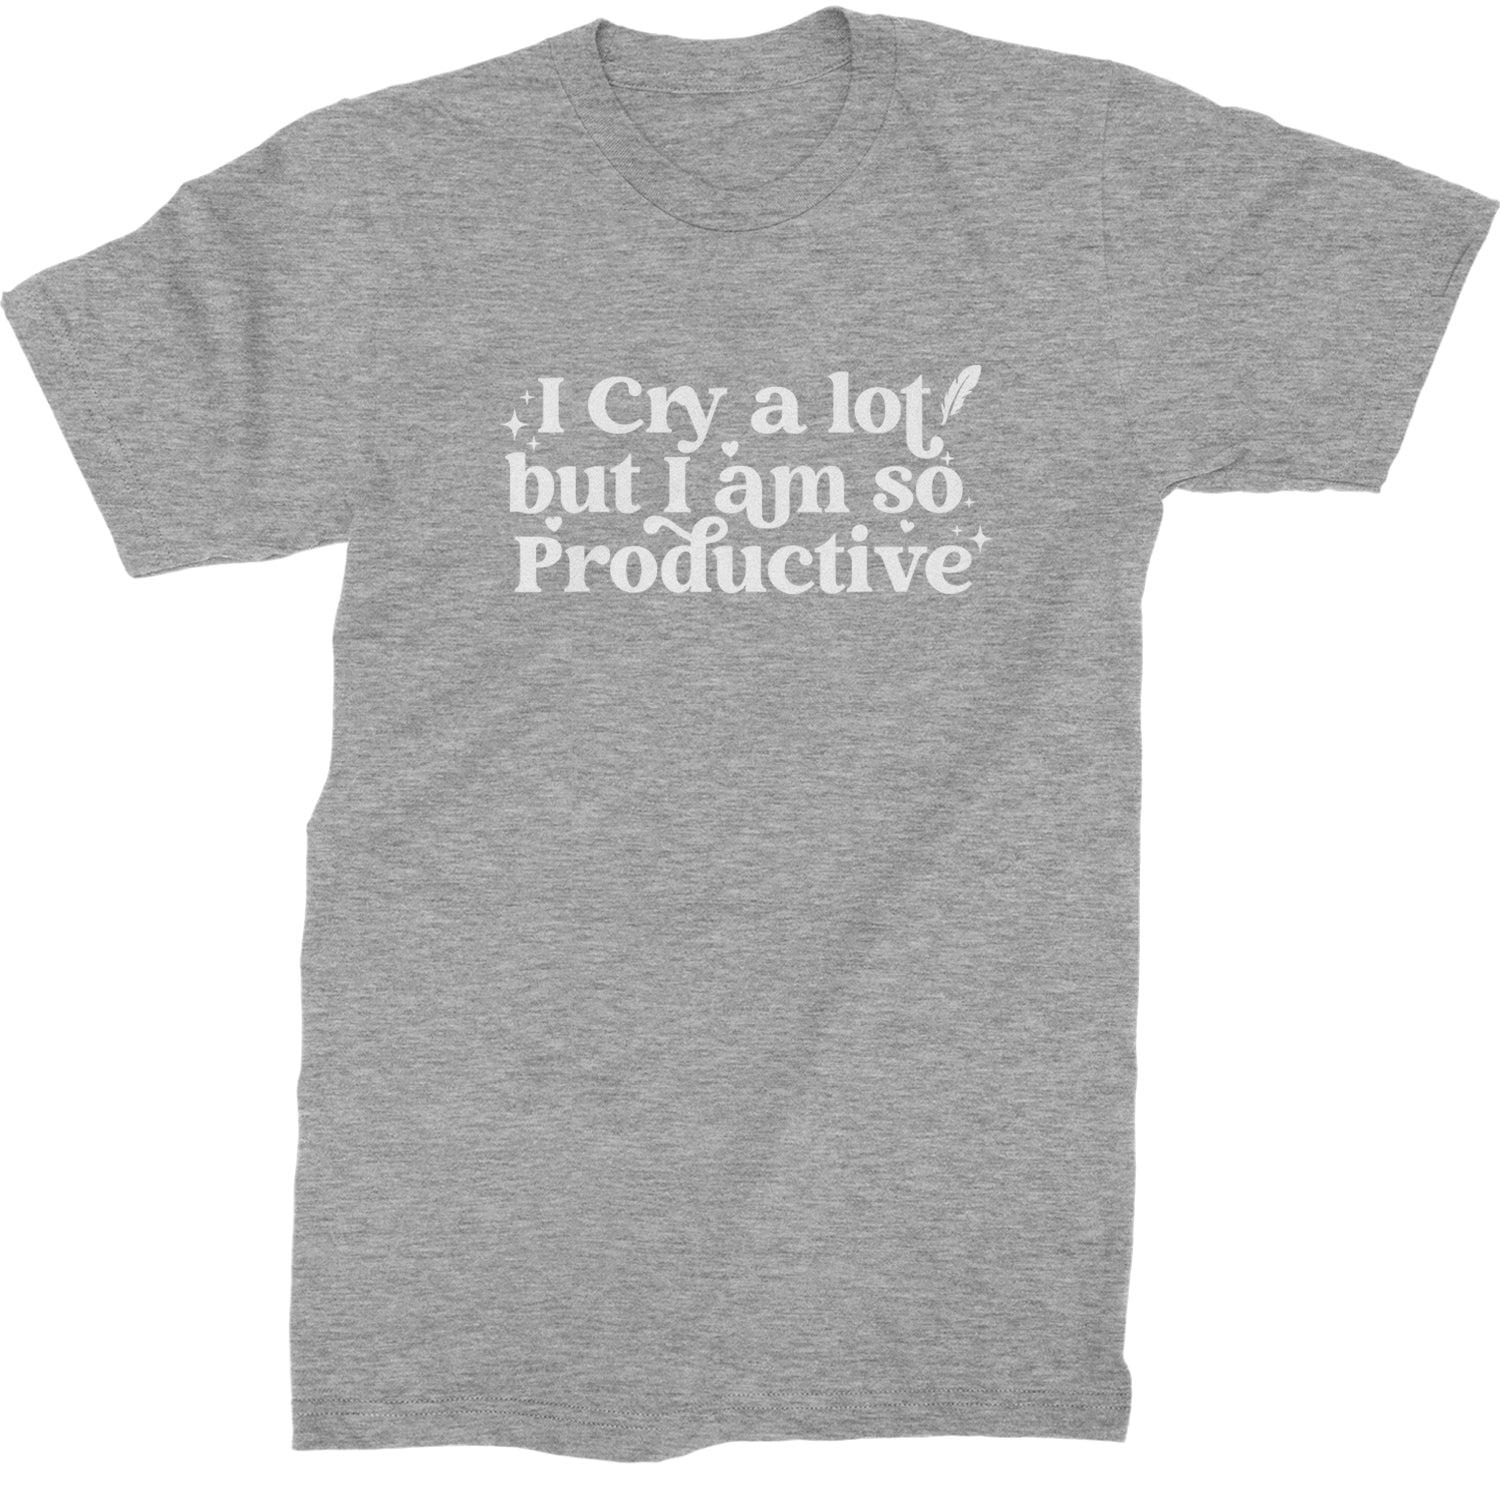 I Cry A Lot But I am So Productive TTPD Mens T-shirt Heather Grey